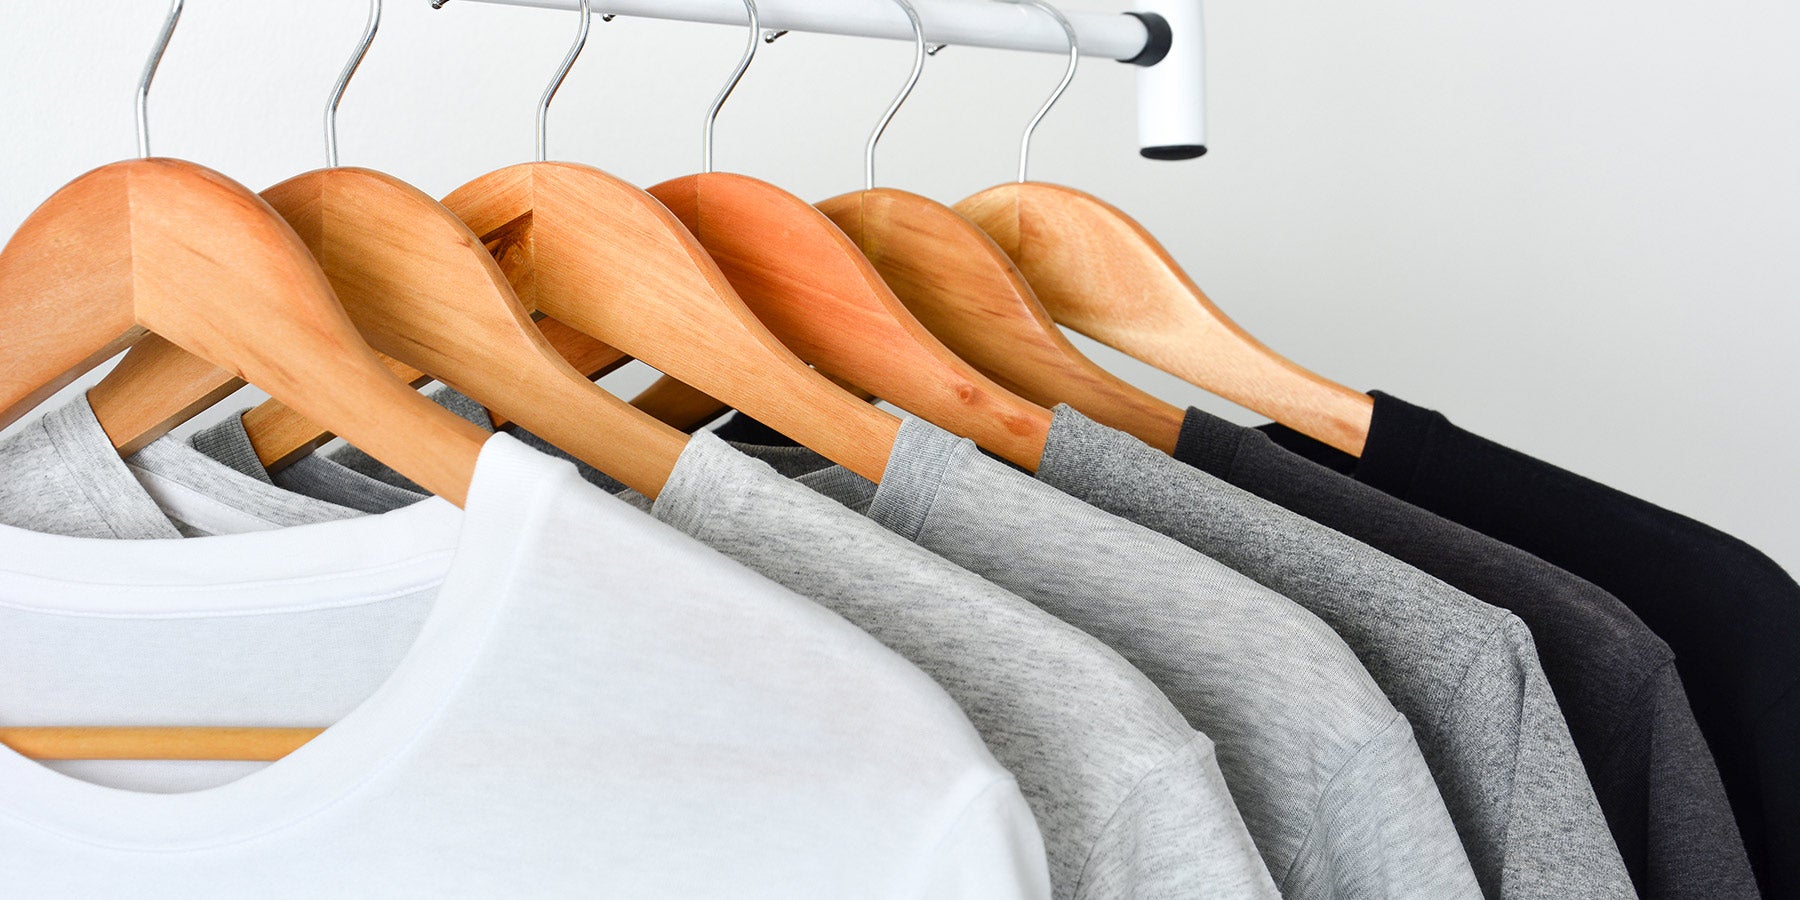 Global apparel manufacturer Hanesbrands Inc., who makes shirts like the ones pictured here, used DDI to help them build a performance management program.